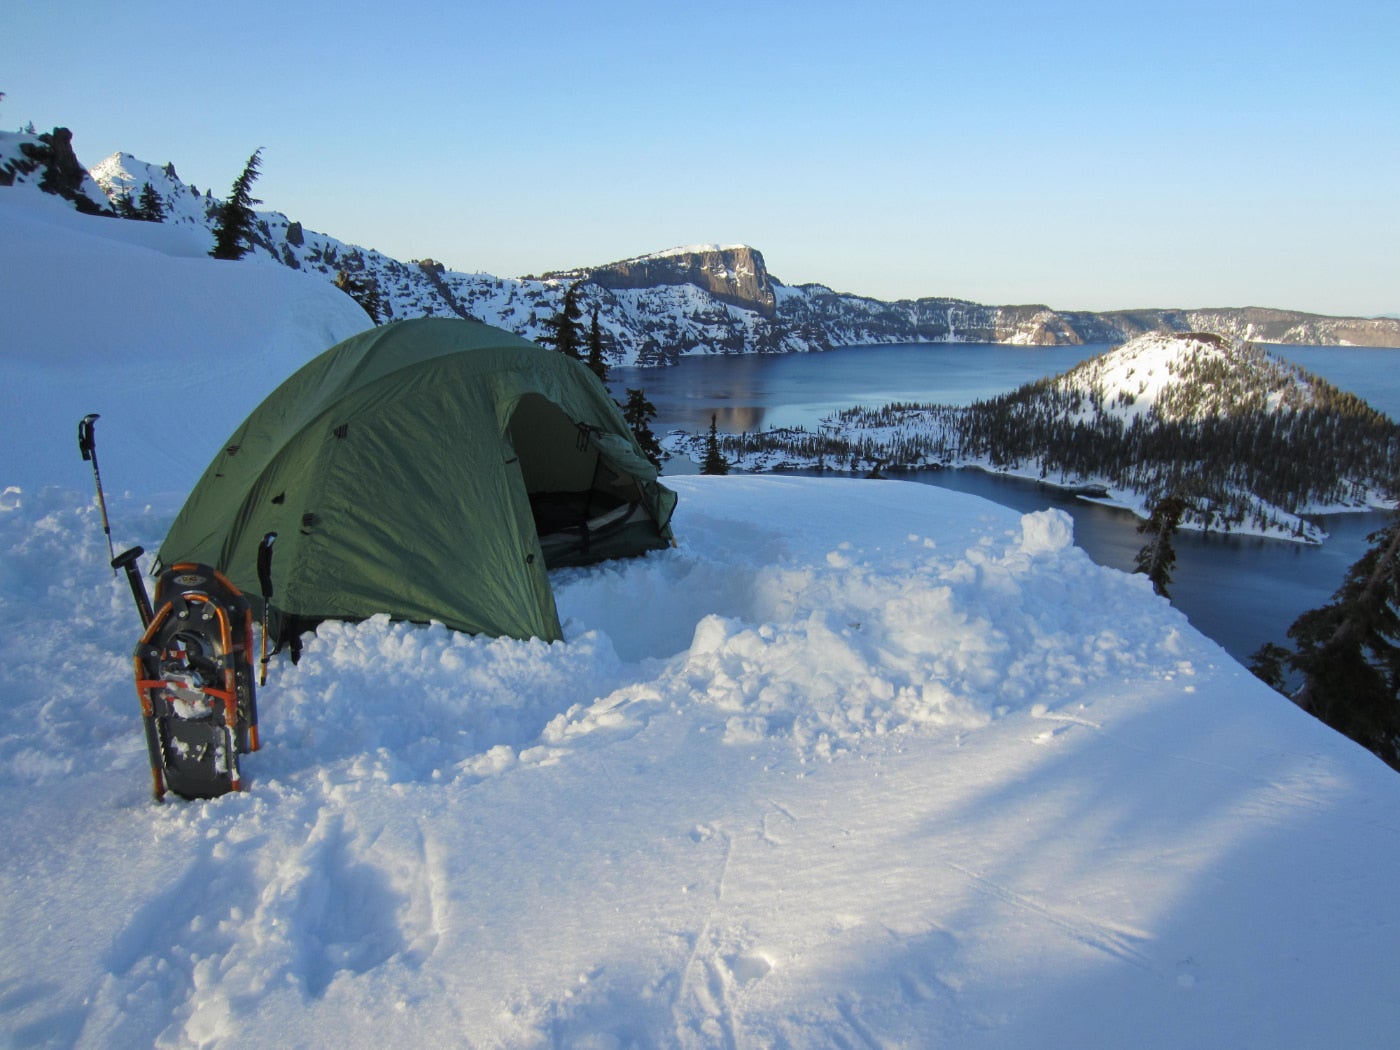 Orange snowshoes and a green tent sit in the deep snow beside crater lake in winter.